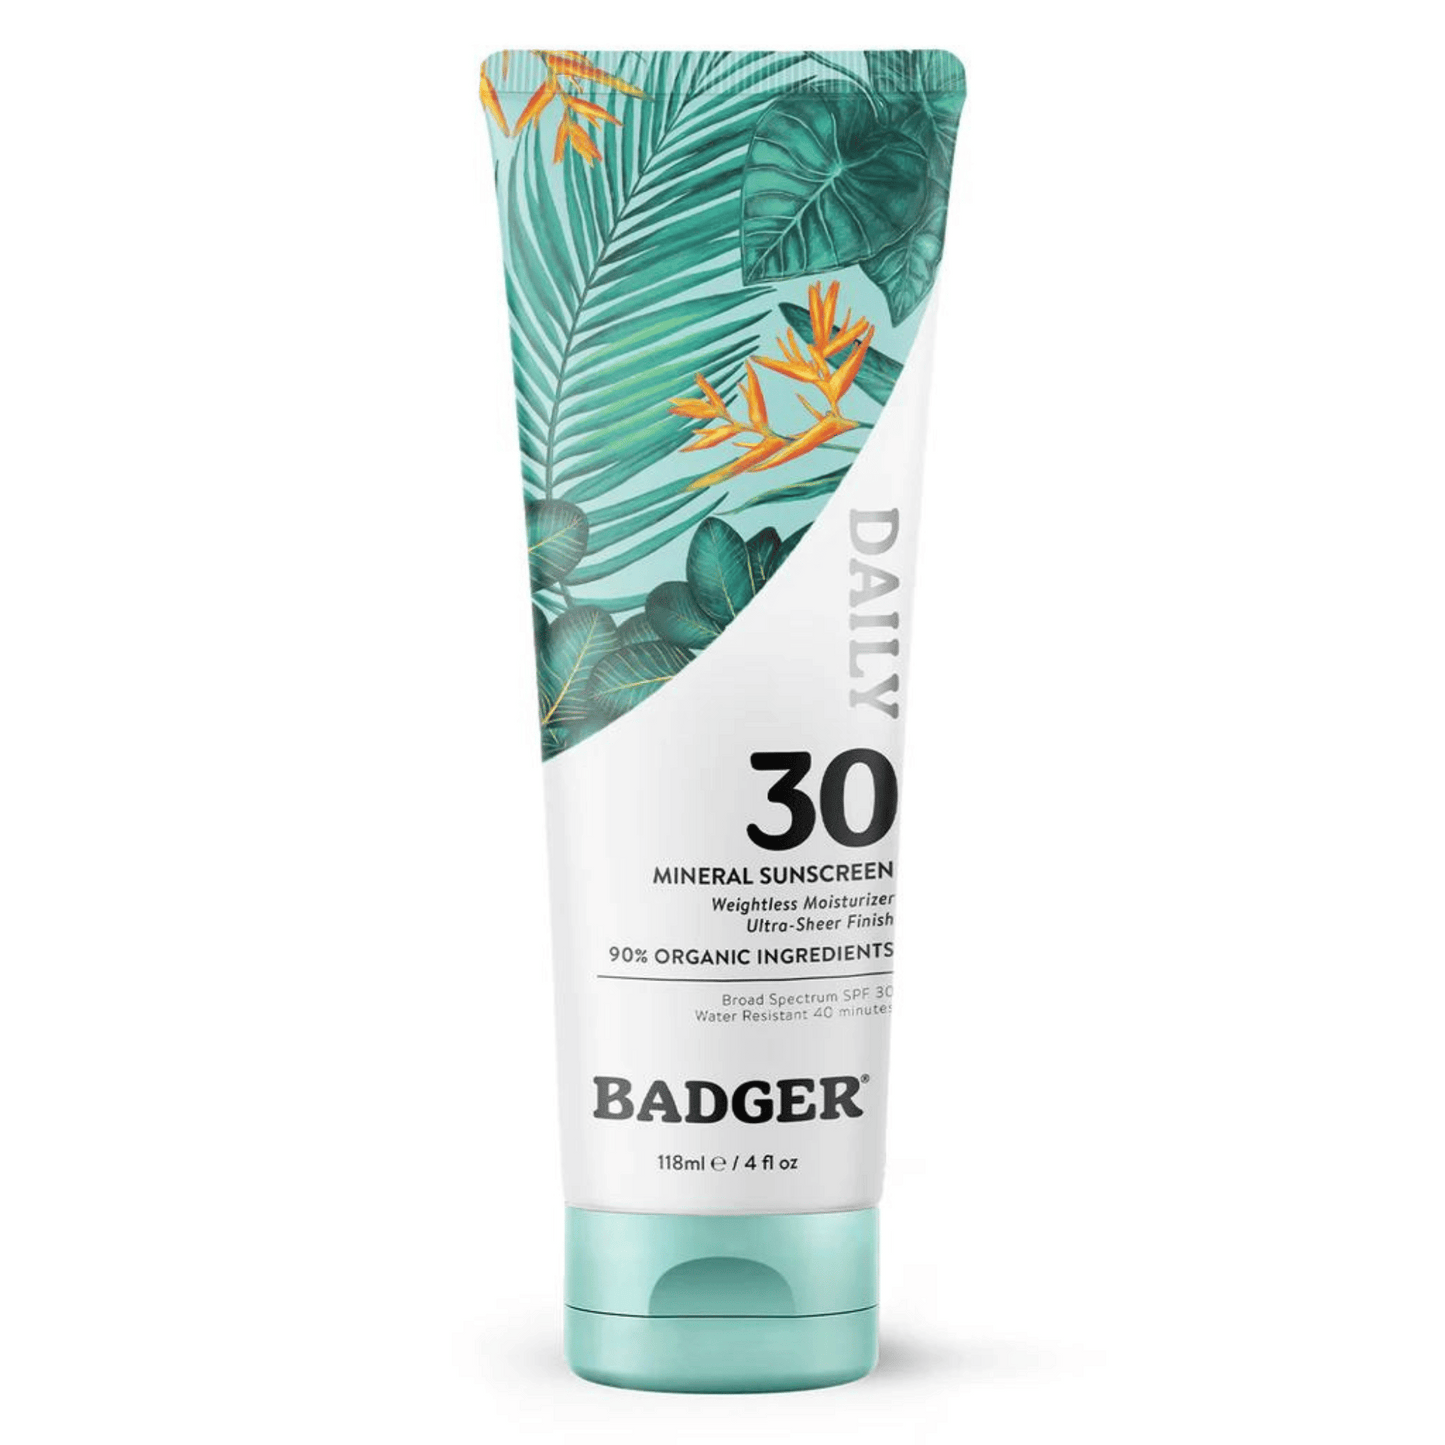 Primary Image of SPF 30 Mineral Sunscreen